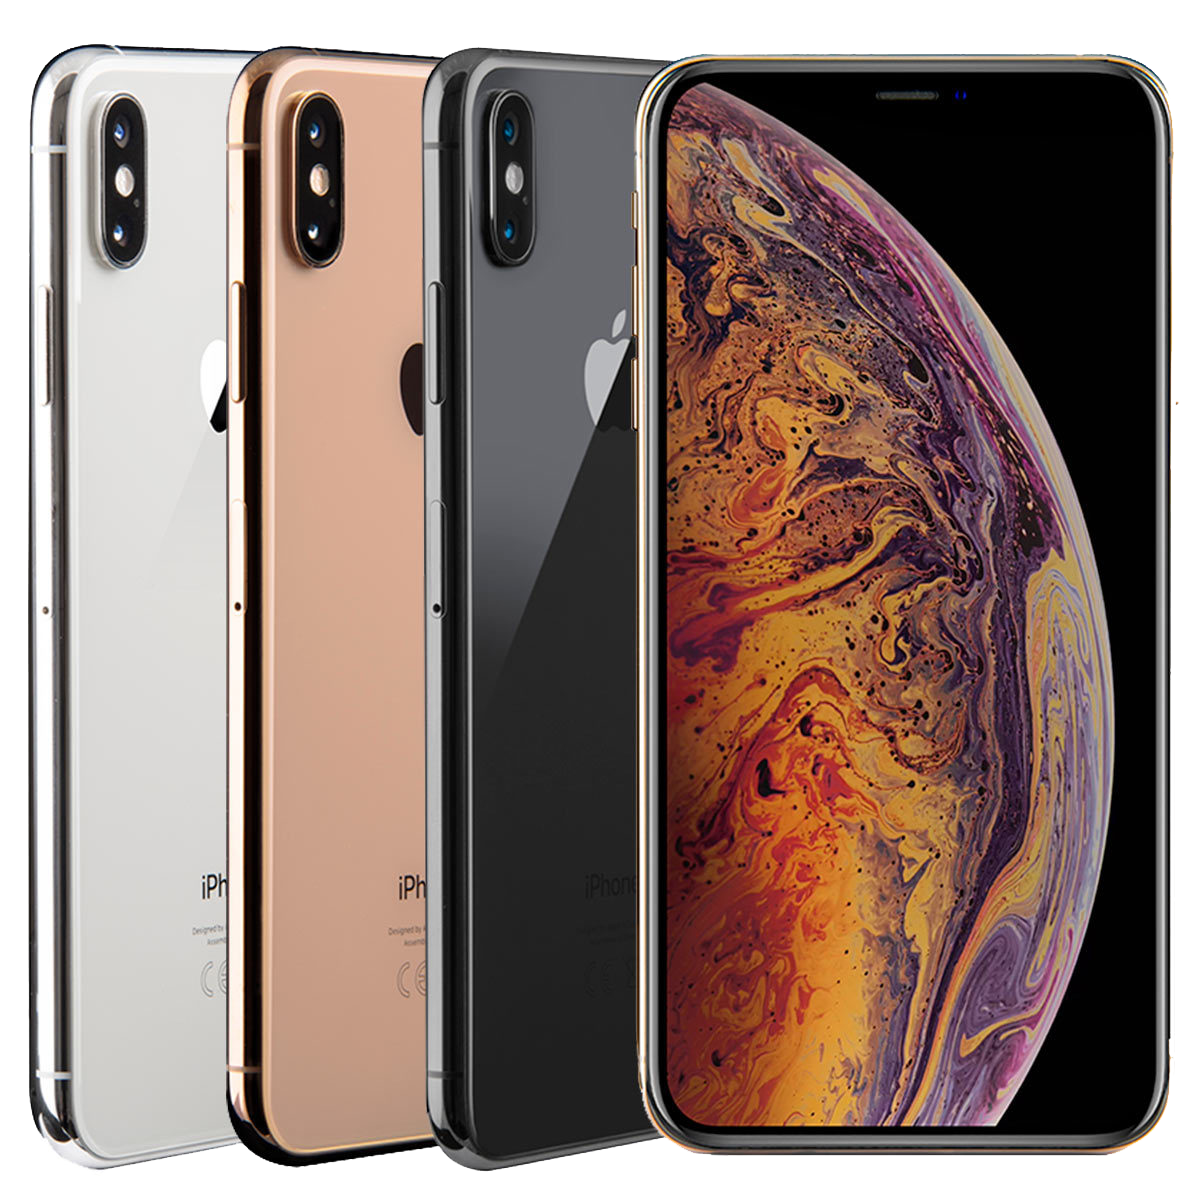 Apple iPhone XS Max 6.5" | A1921 A2101 | Unlocked